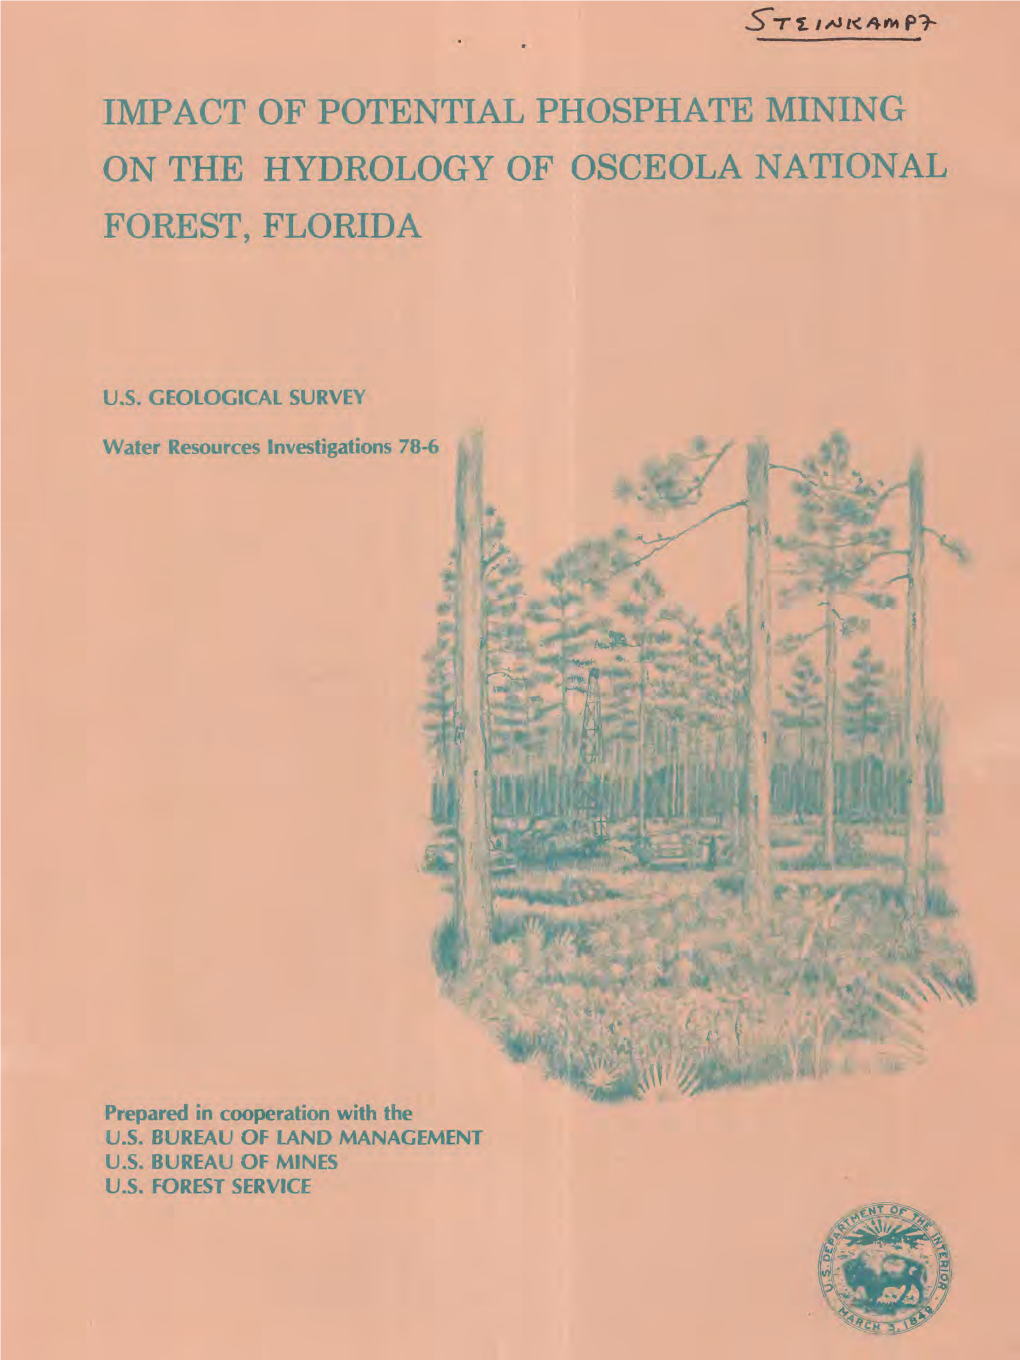 Impact of Potential Phosphate Mining on the Hydrology of Osceola National Forest, Florida